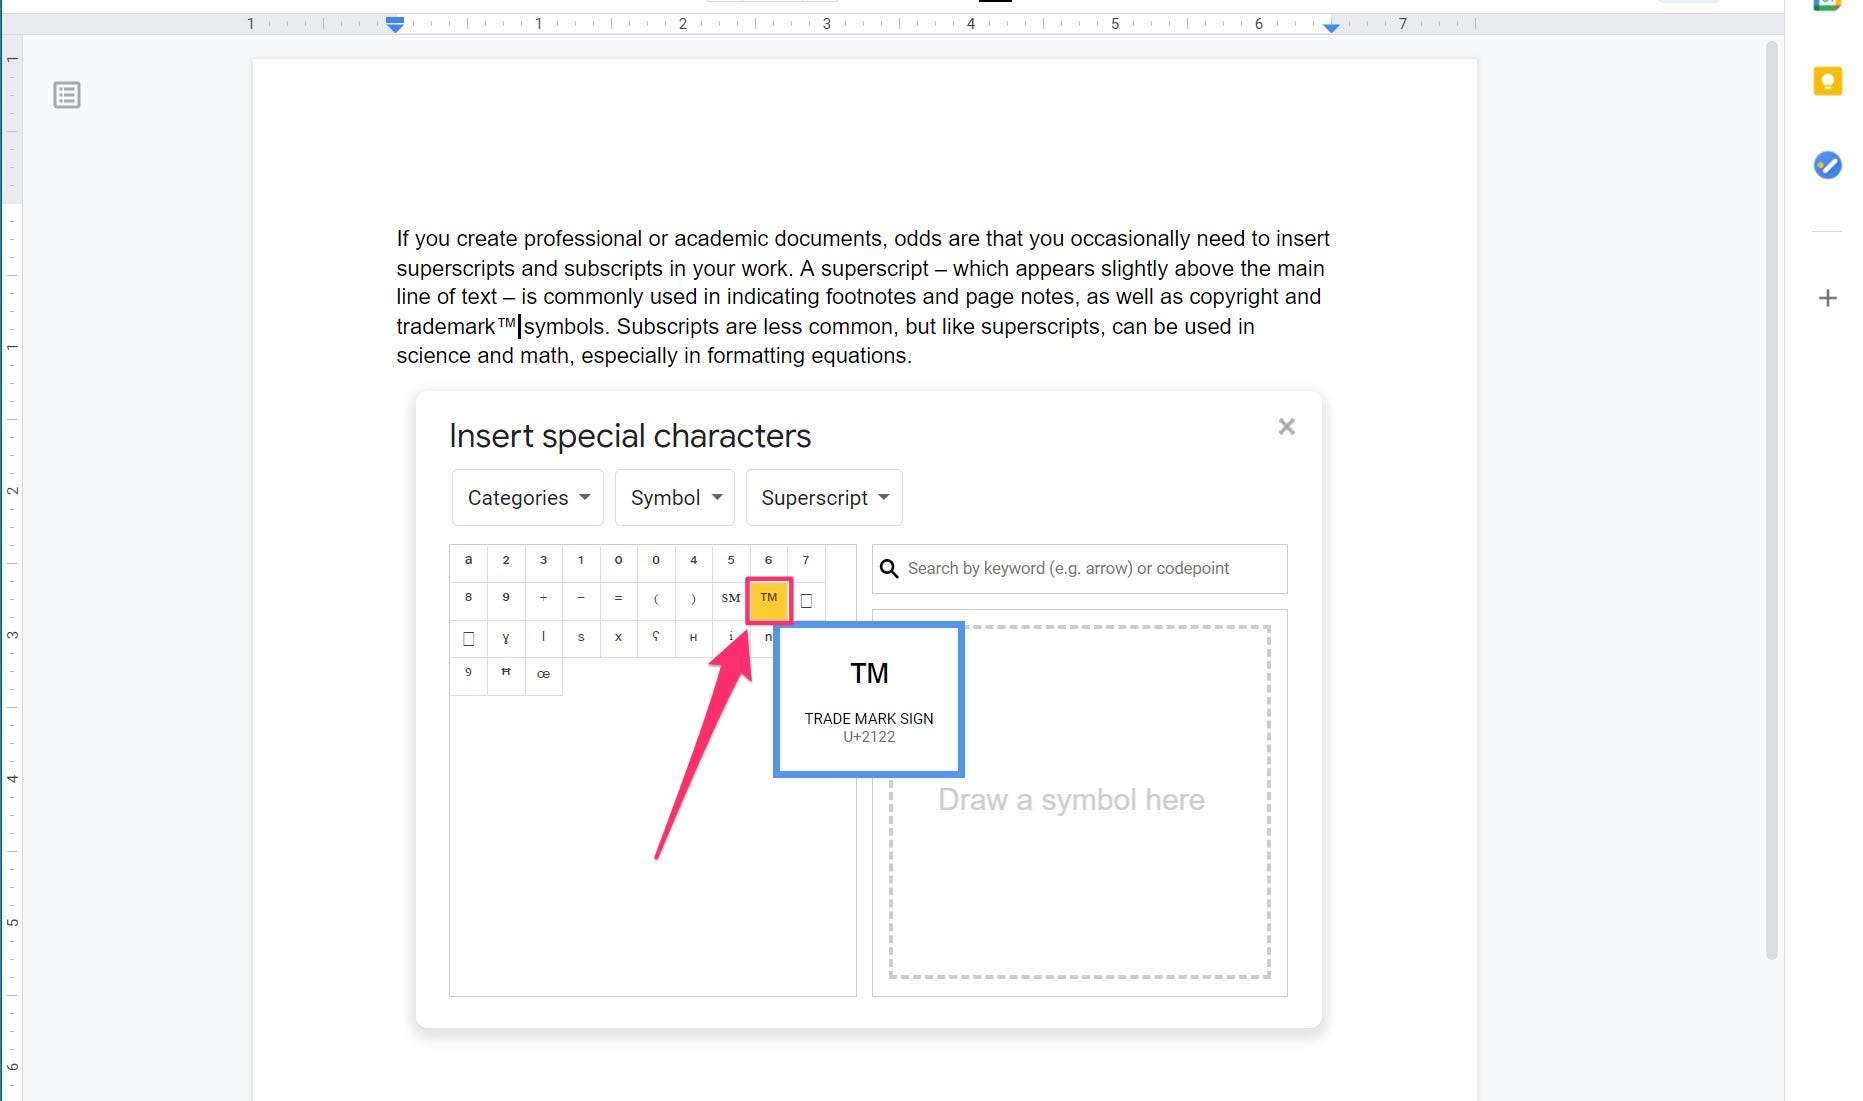 How to add a superscript or subscript in Google Docs to insert